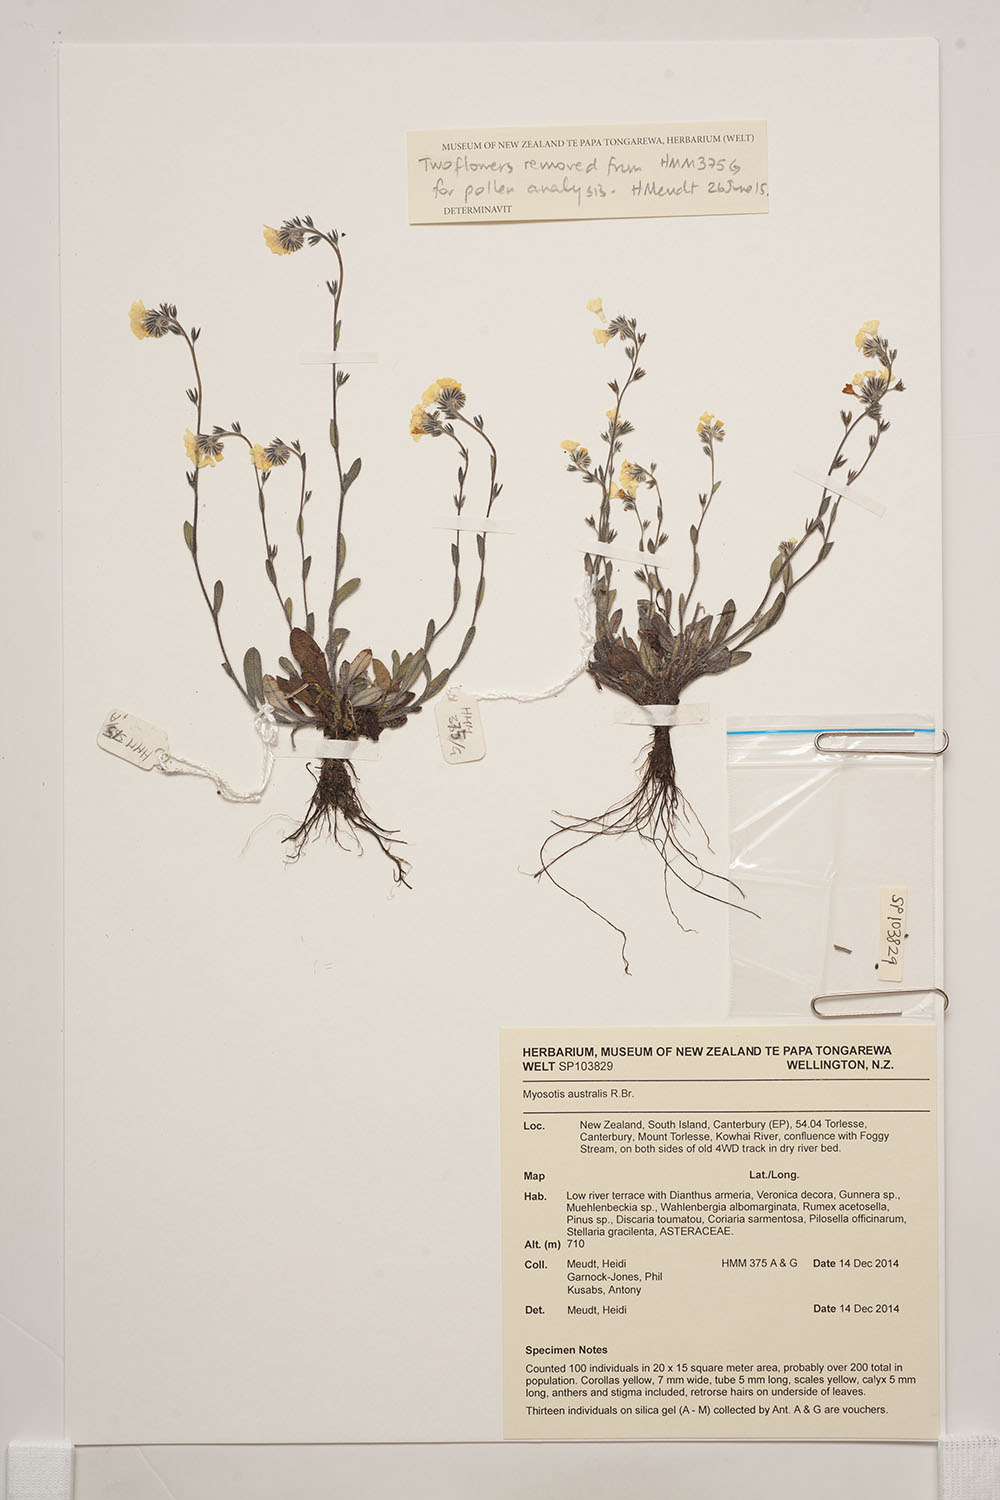 Specimen sheet for Myosotis australis subsp. australis R.Br. – a sheet with the specimen attached to it, along with an identification card